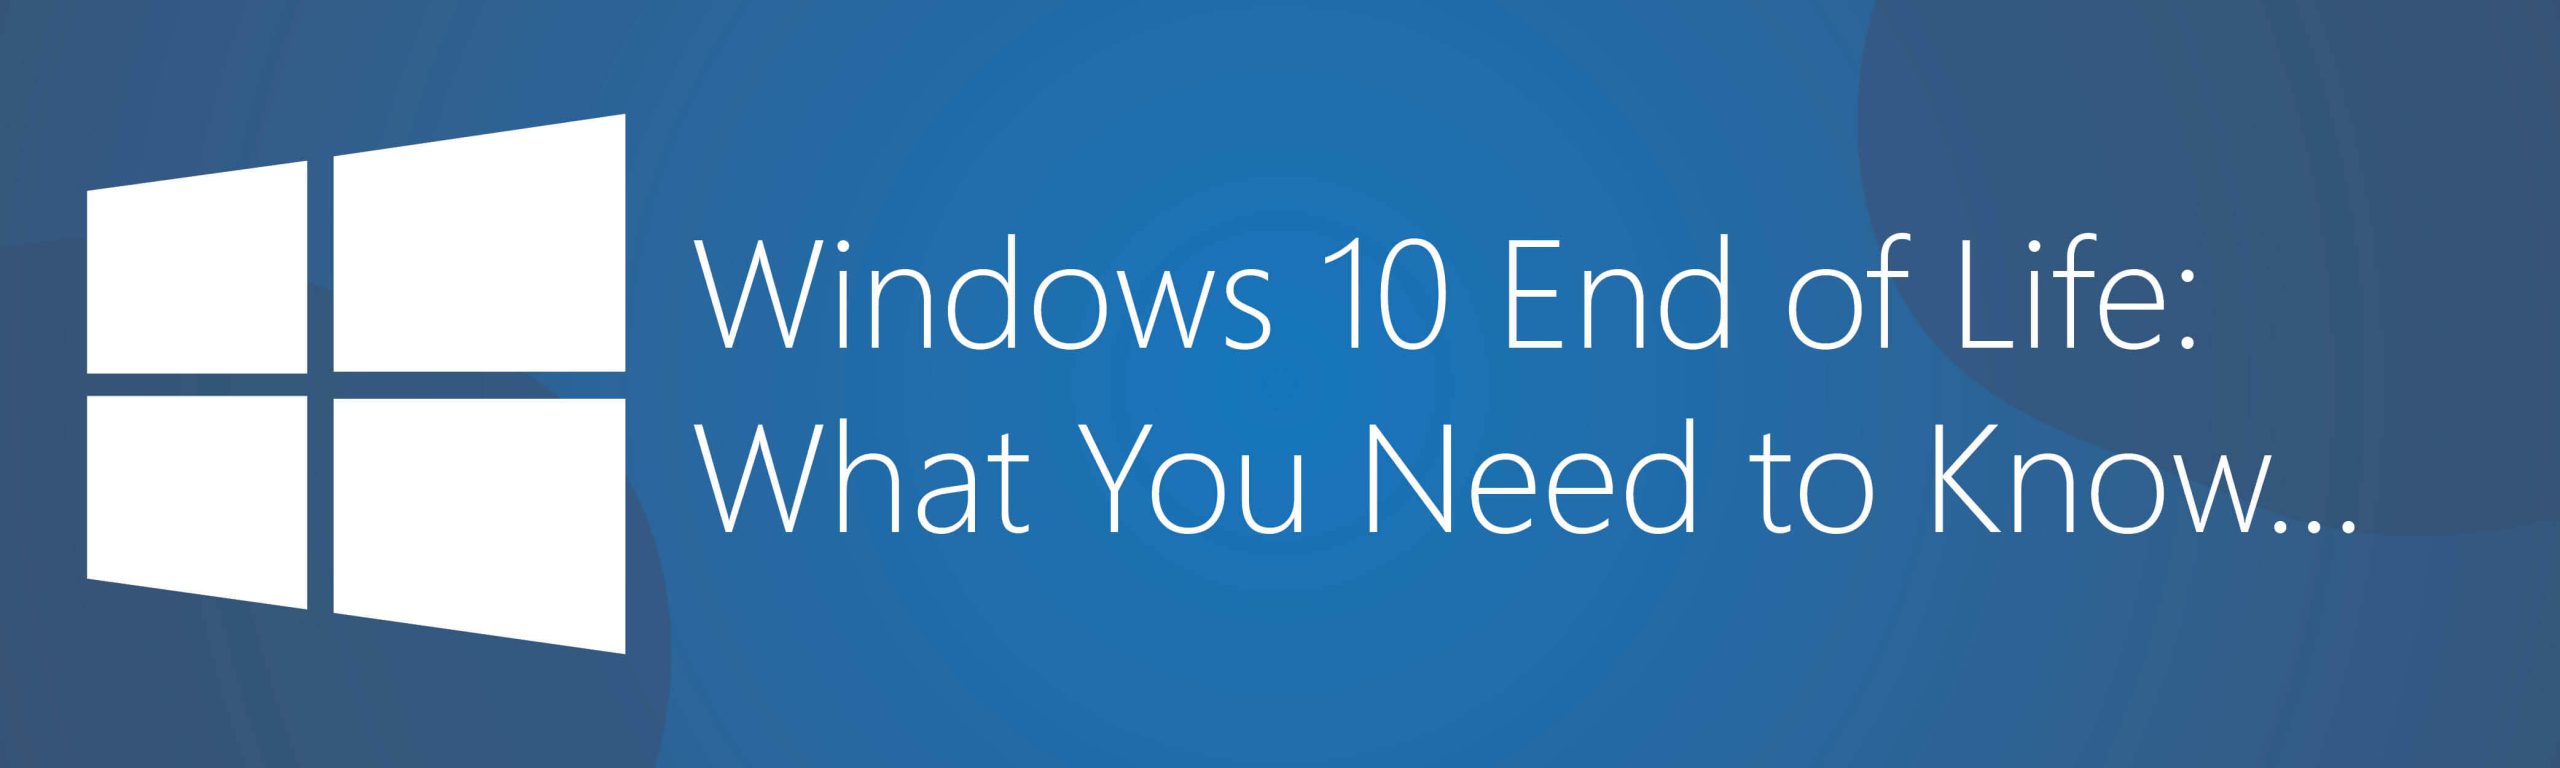 Windows 10 End of Life Banner